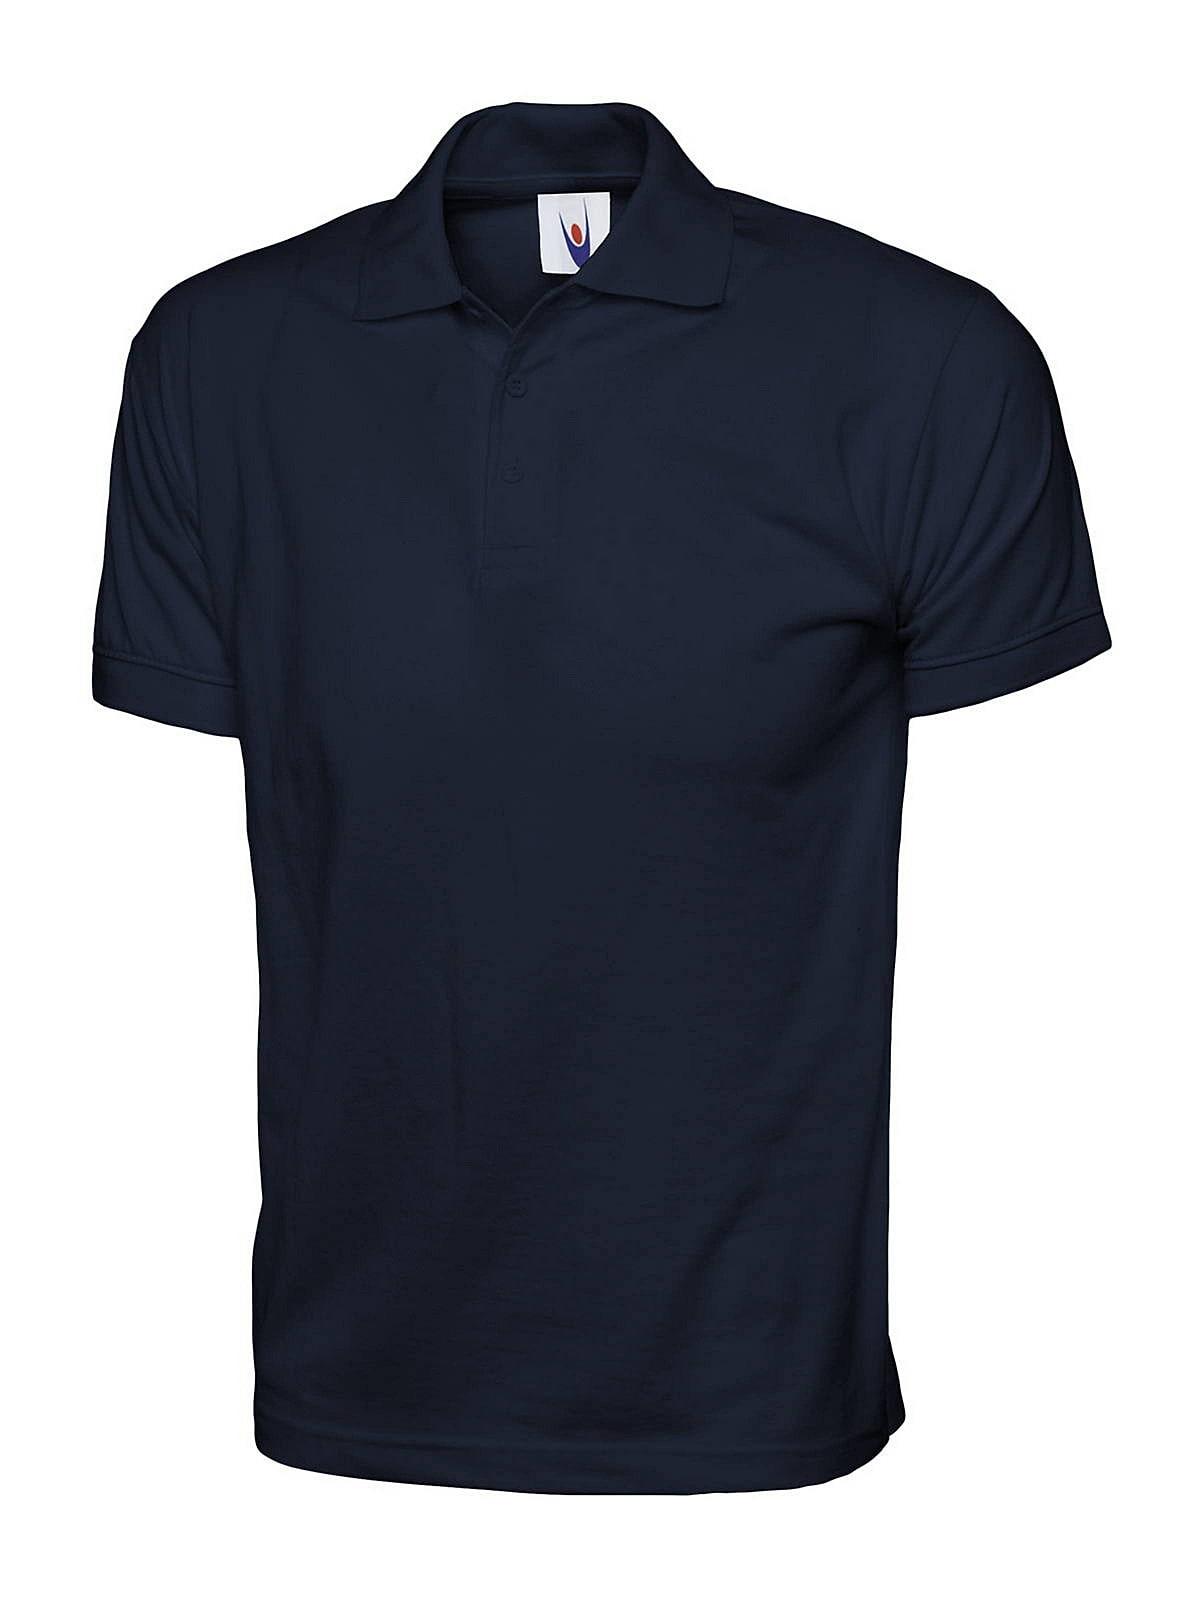 Uneek 200GSM Jersey Polo Shirt in Navy (Product Code: UC122)